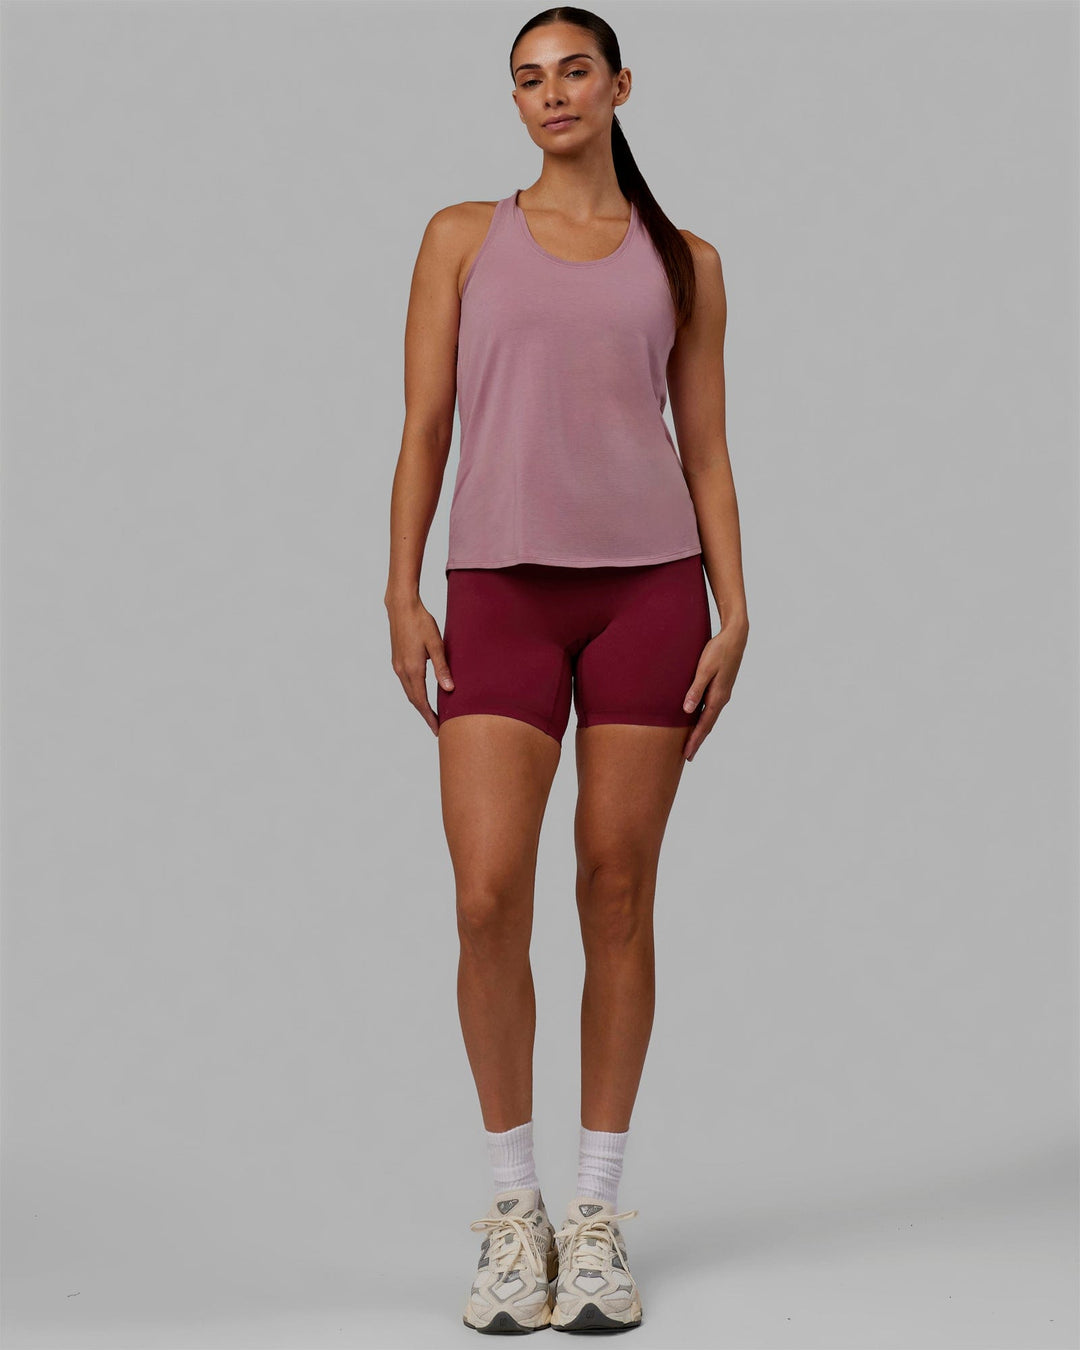 Woman wearing Charge PimaFLX-Lite Active Tank - Cosmetic Pink